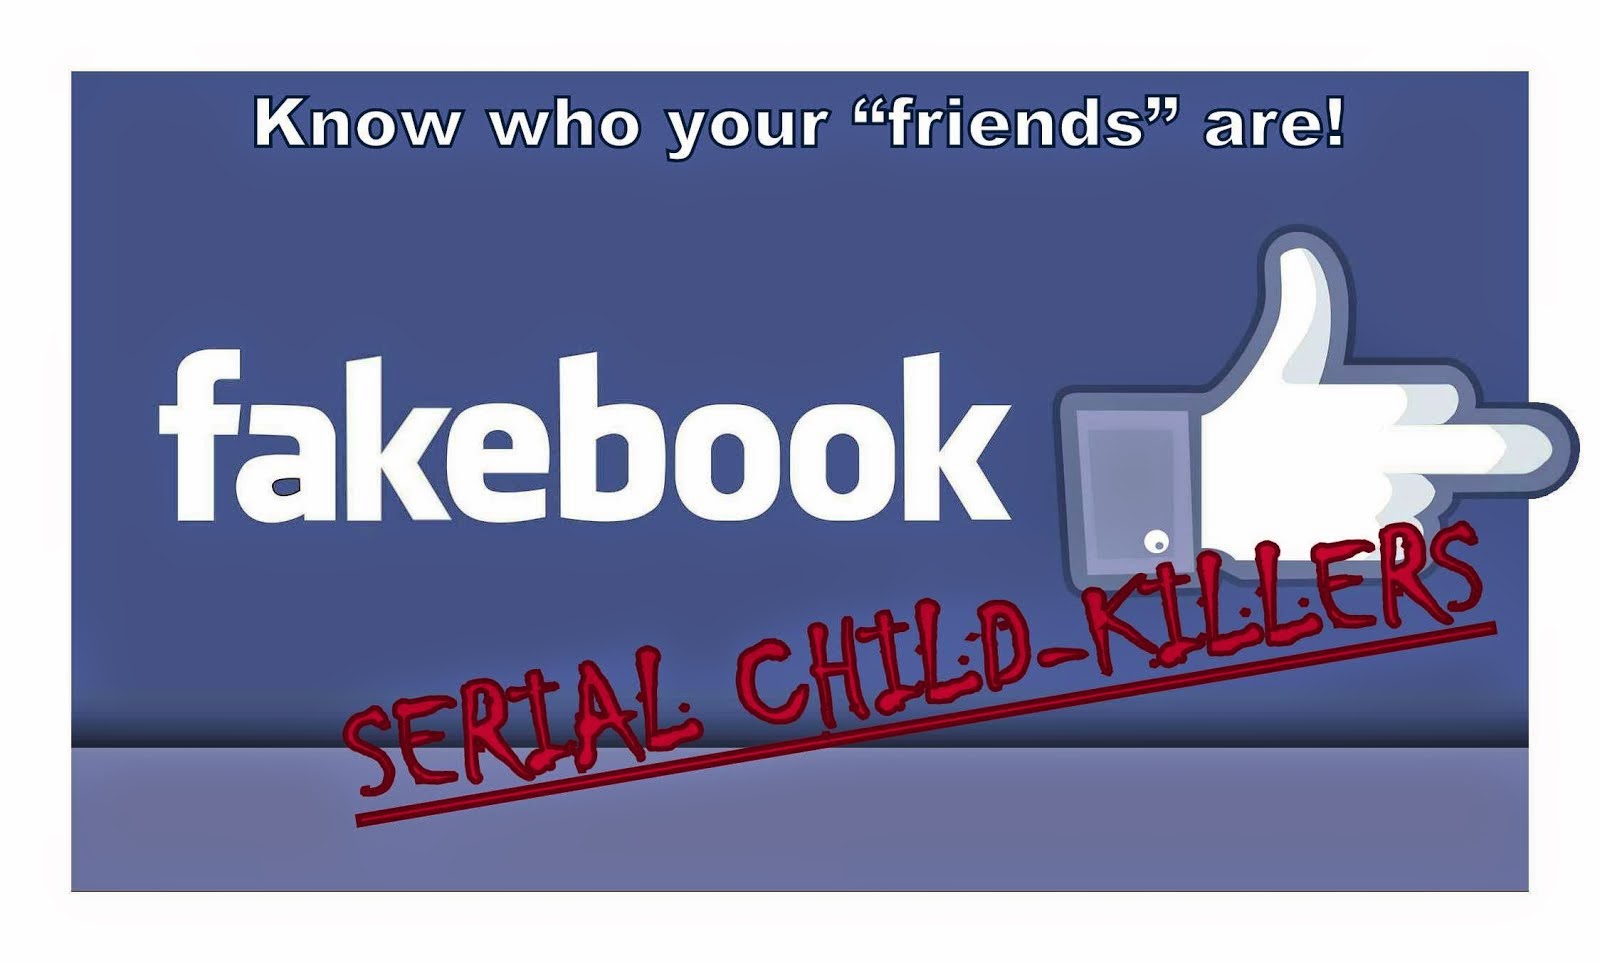 F*YOU FAKEBOOK for Facilitating the Cyber-Crimes of Serial CHILD-KILLERS in CO